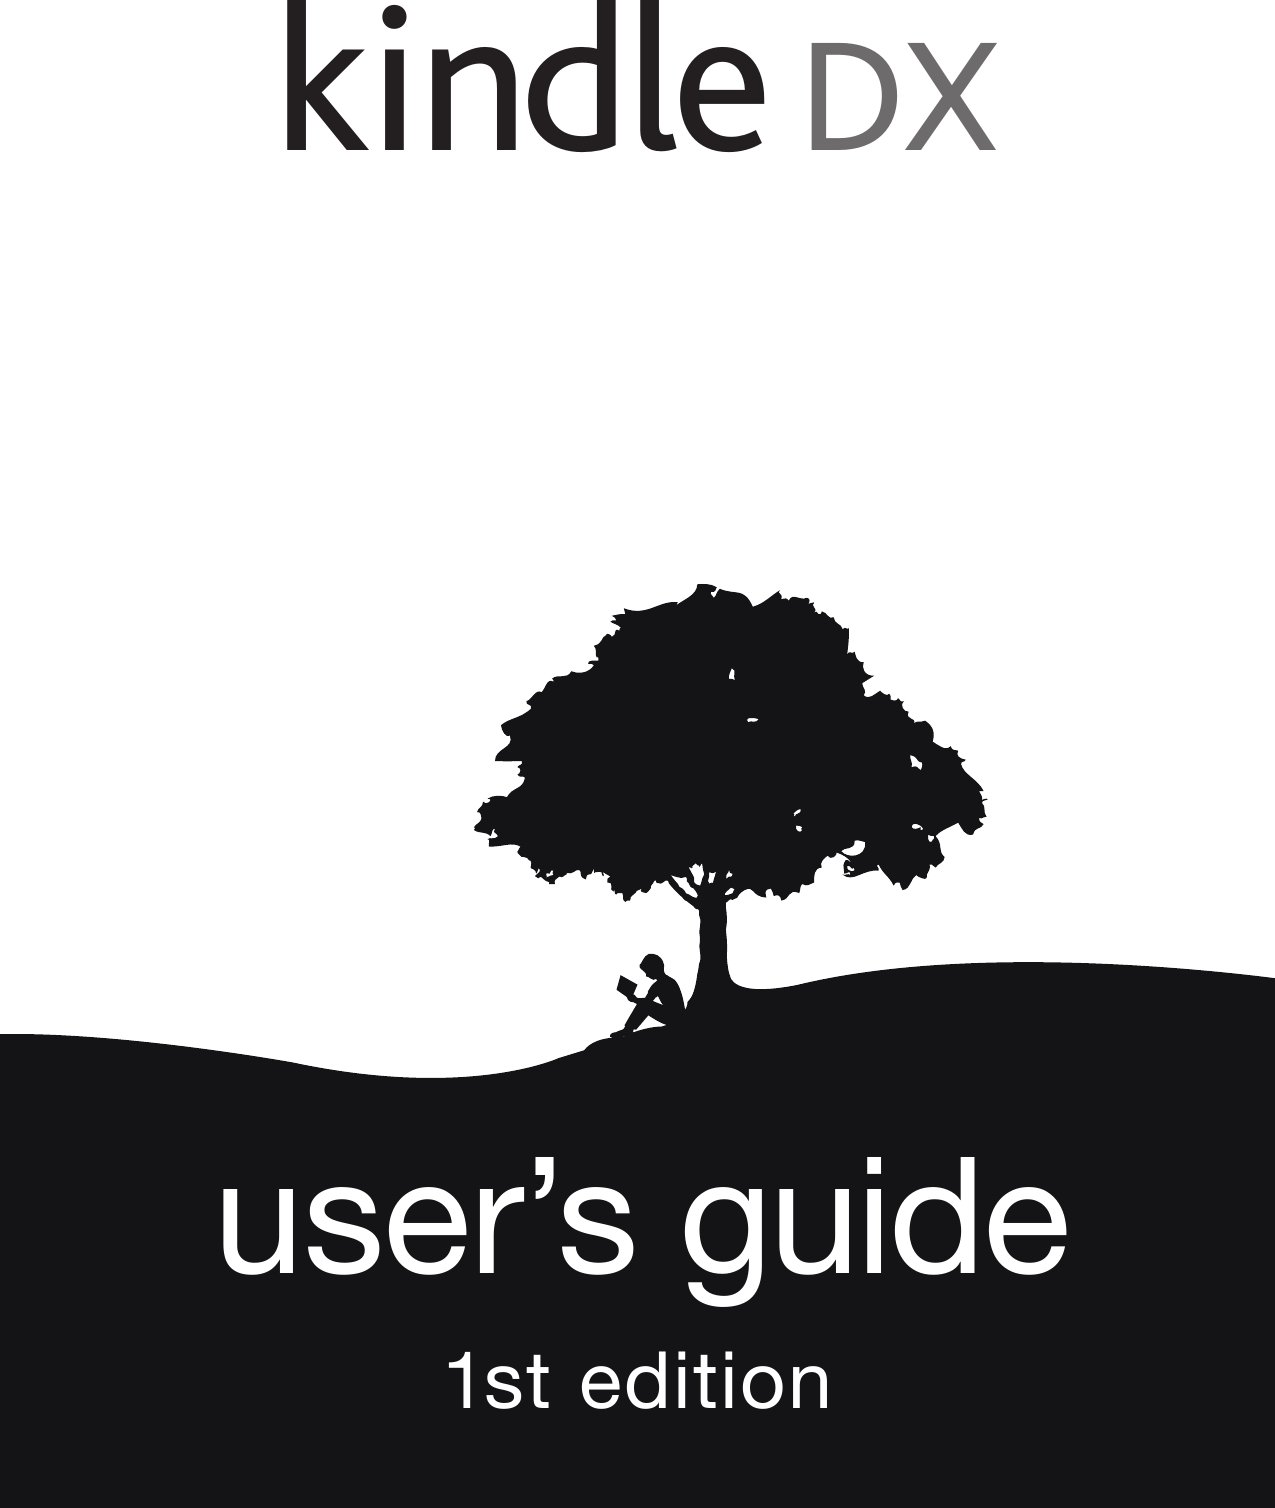 kindle DXuser’s guide1st edition